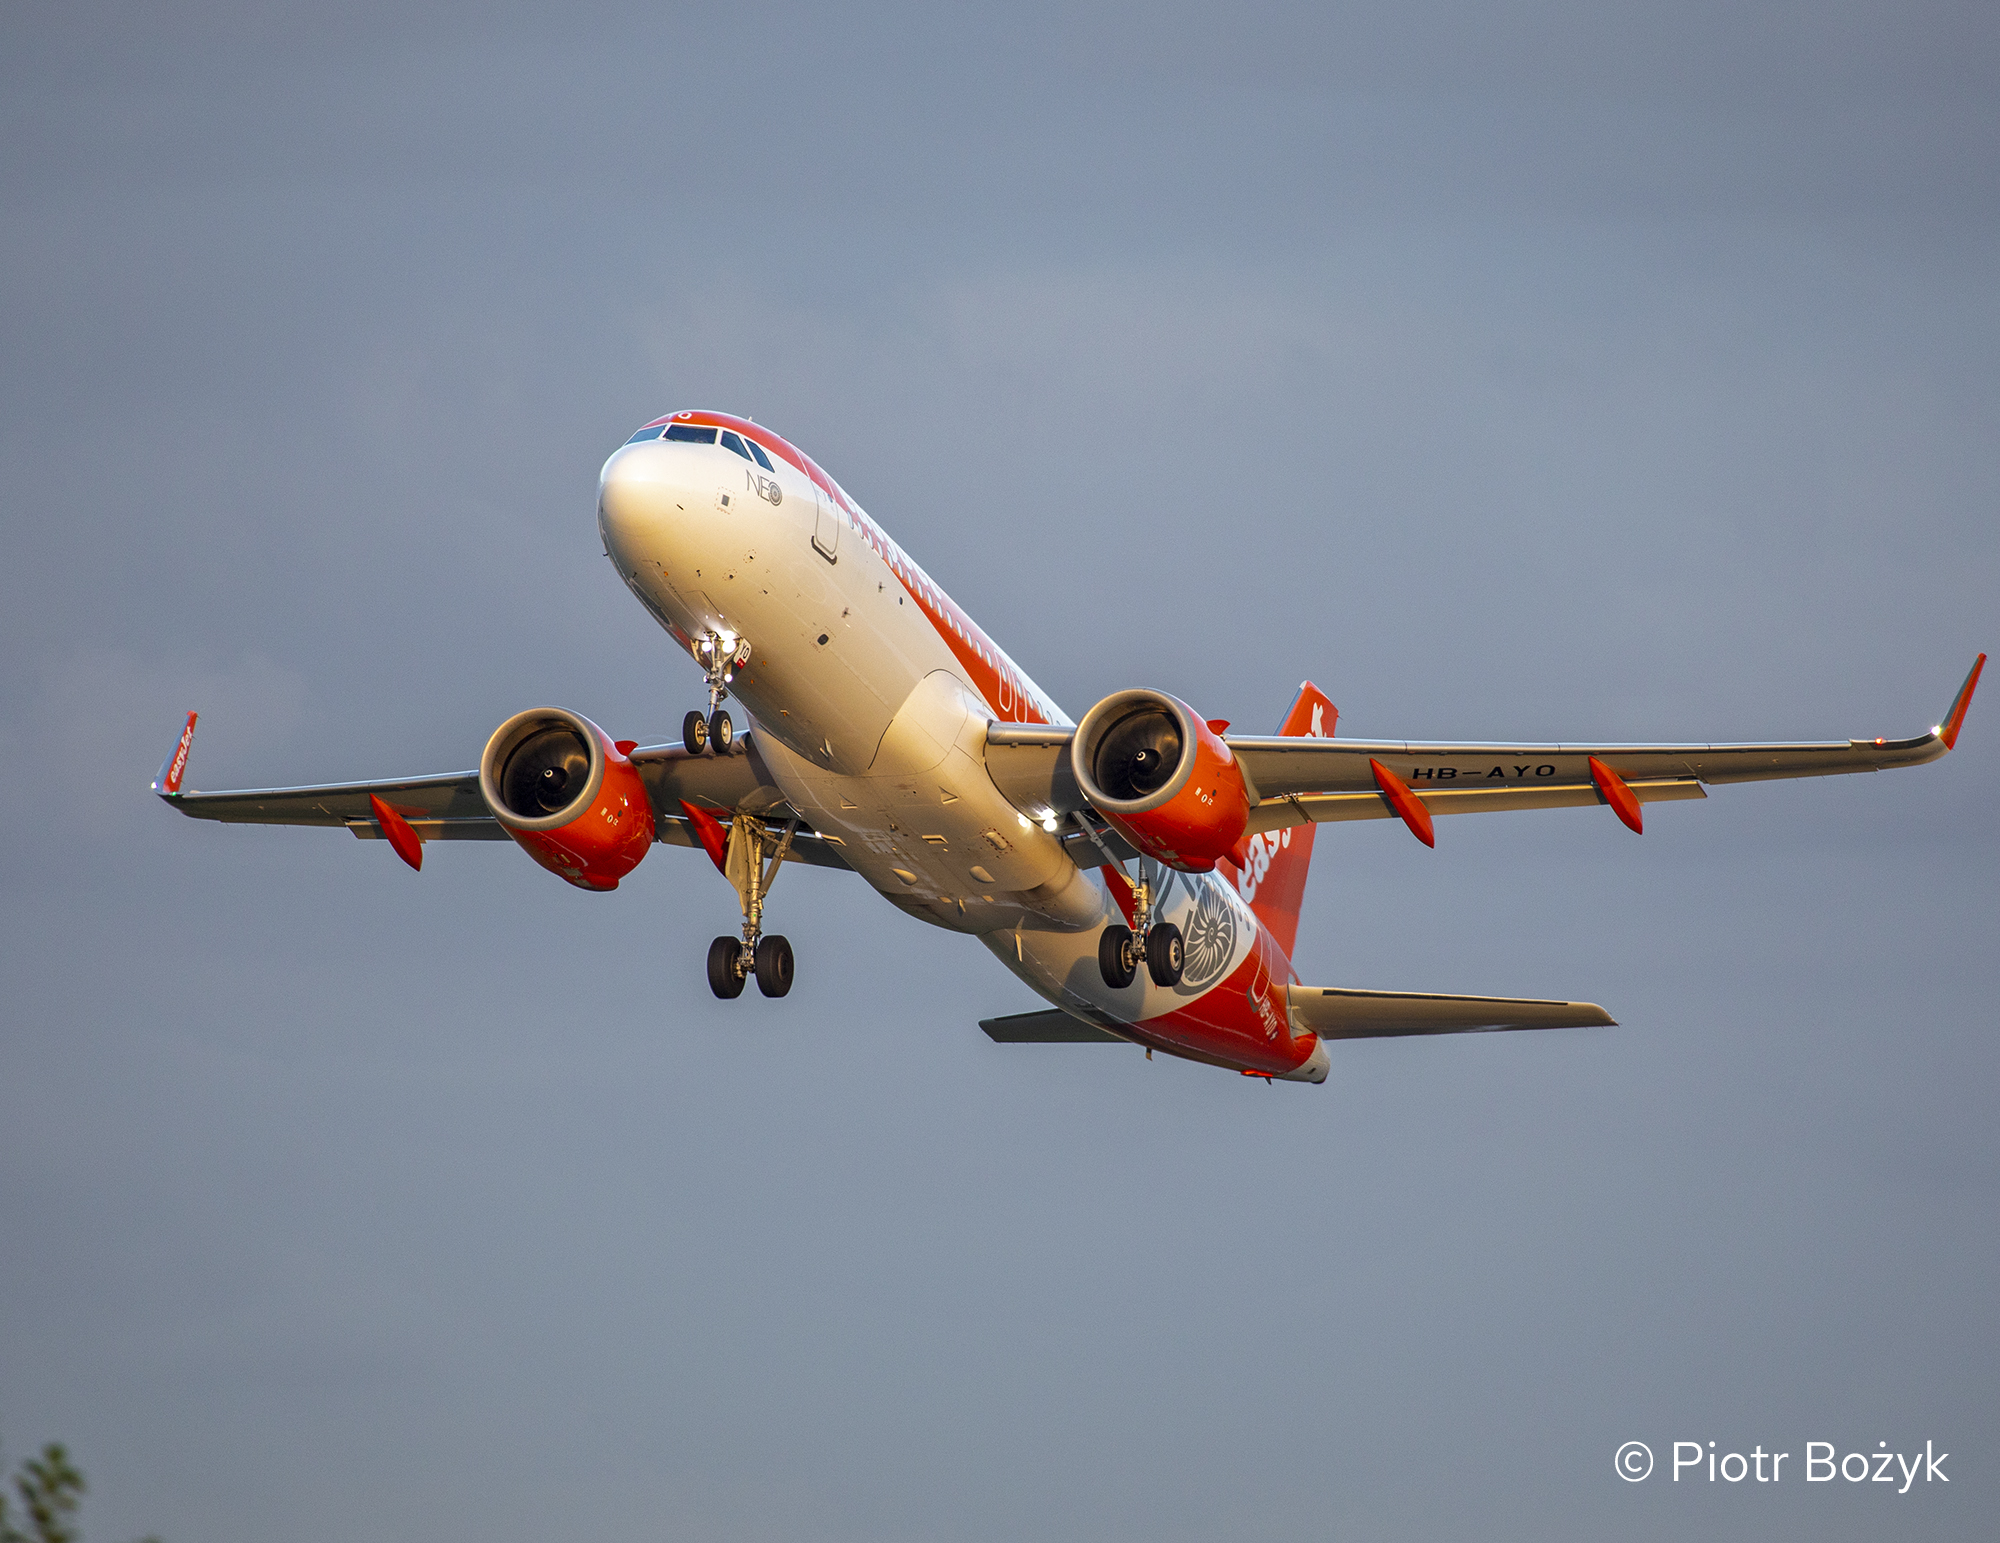 An easyJet Airbus climbing after takeoff.